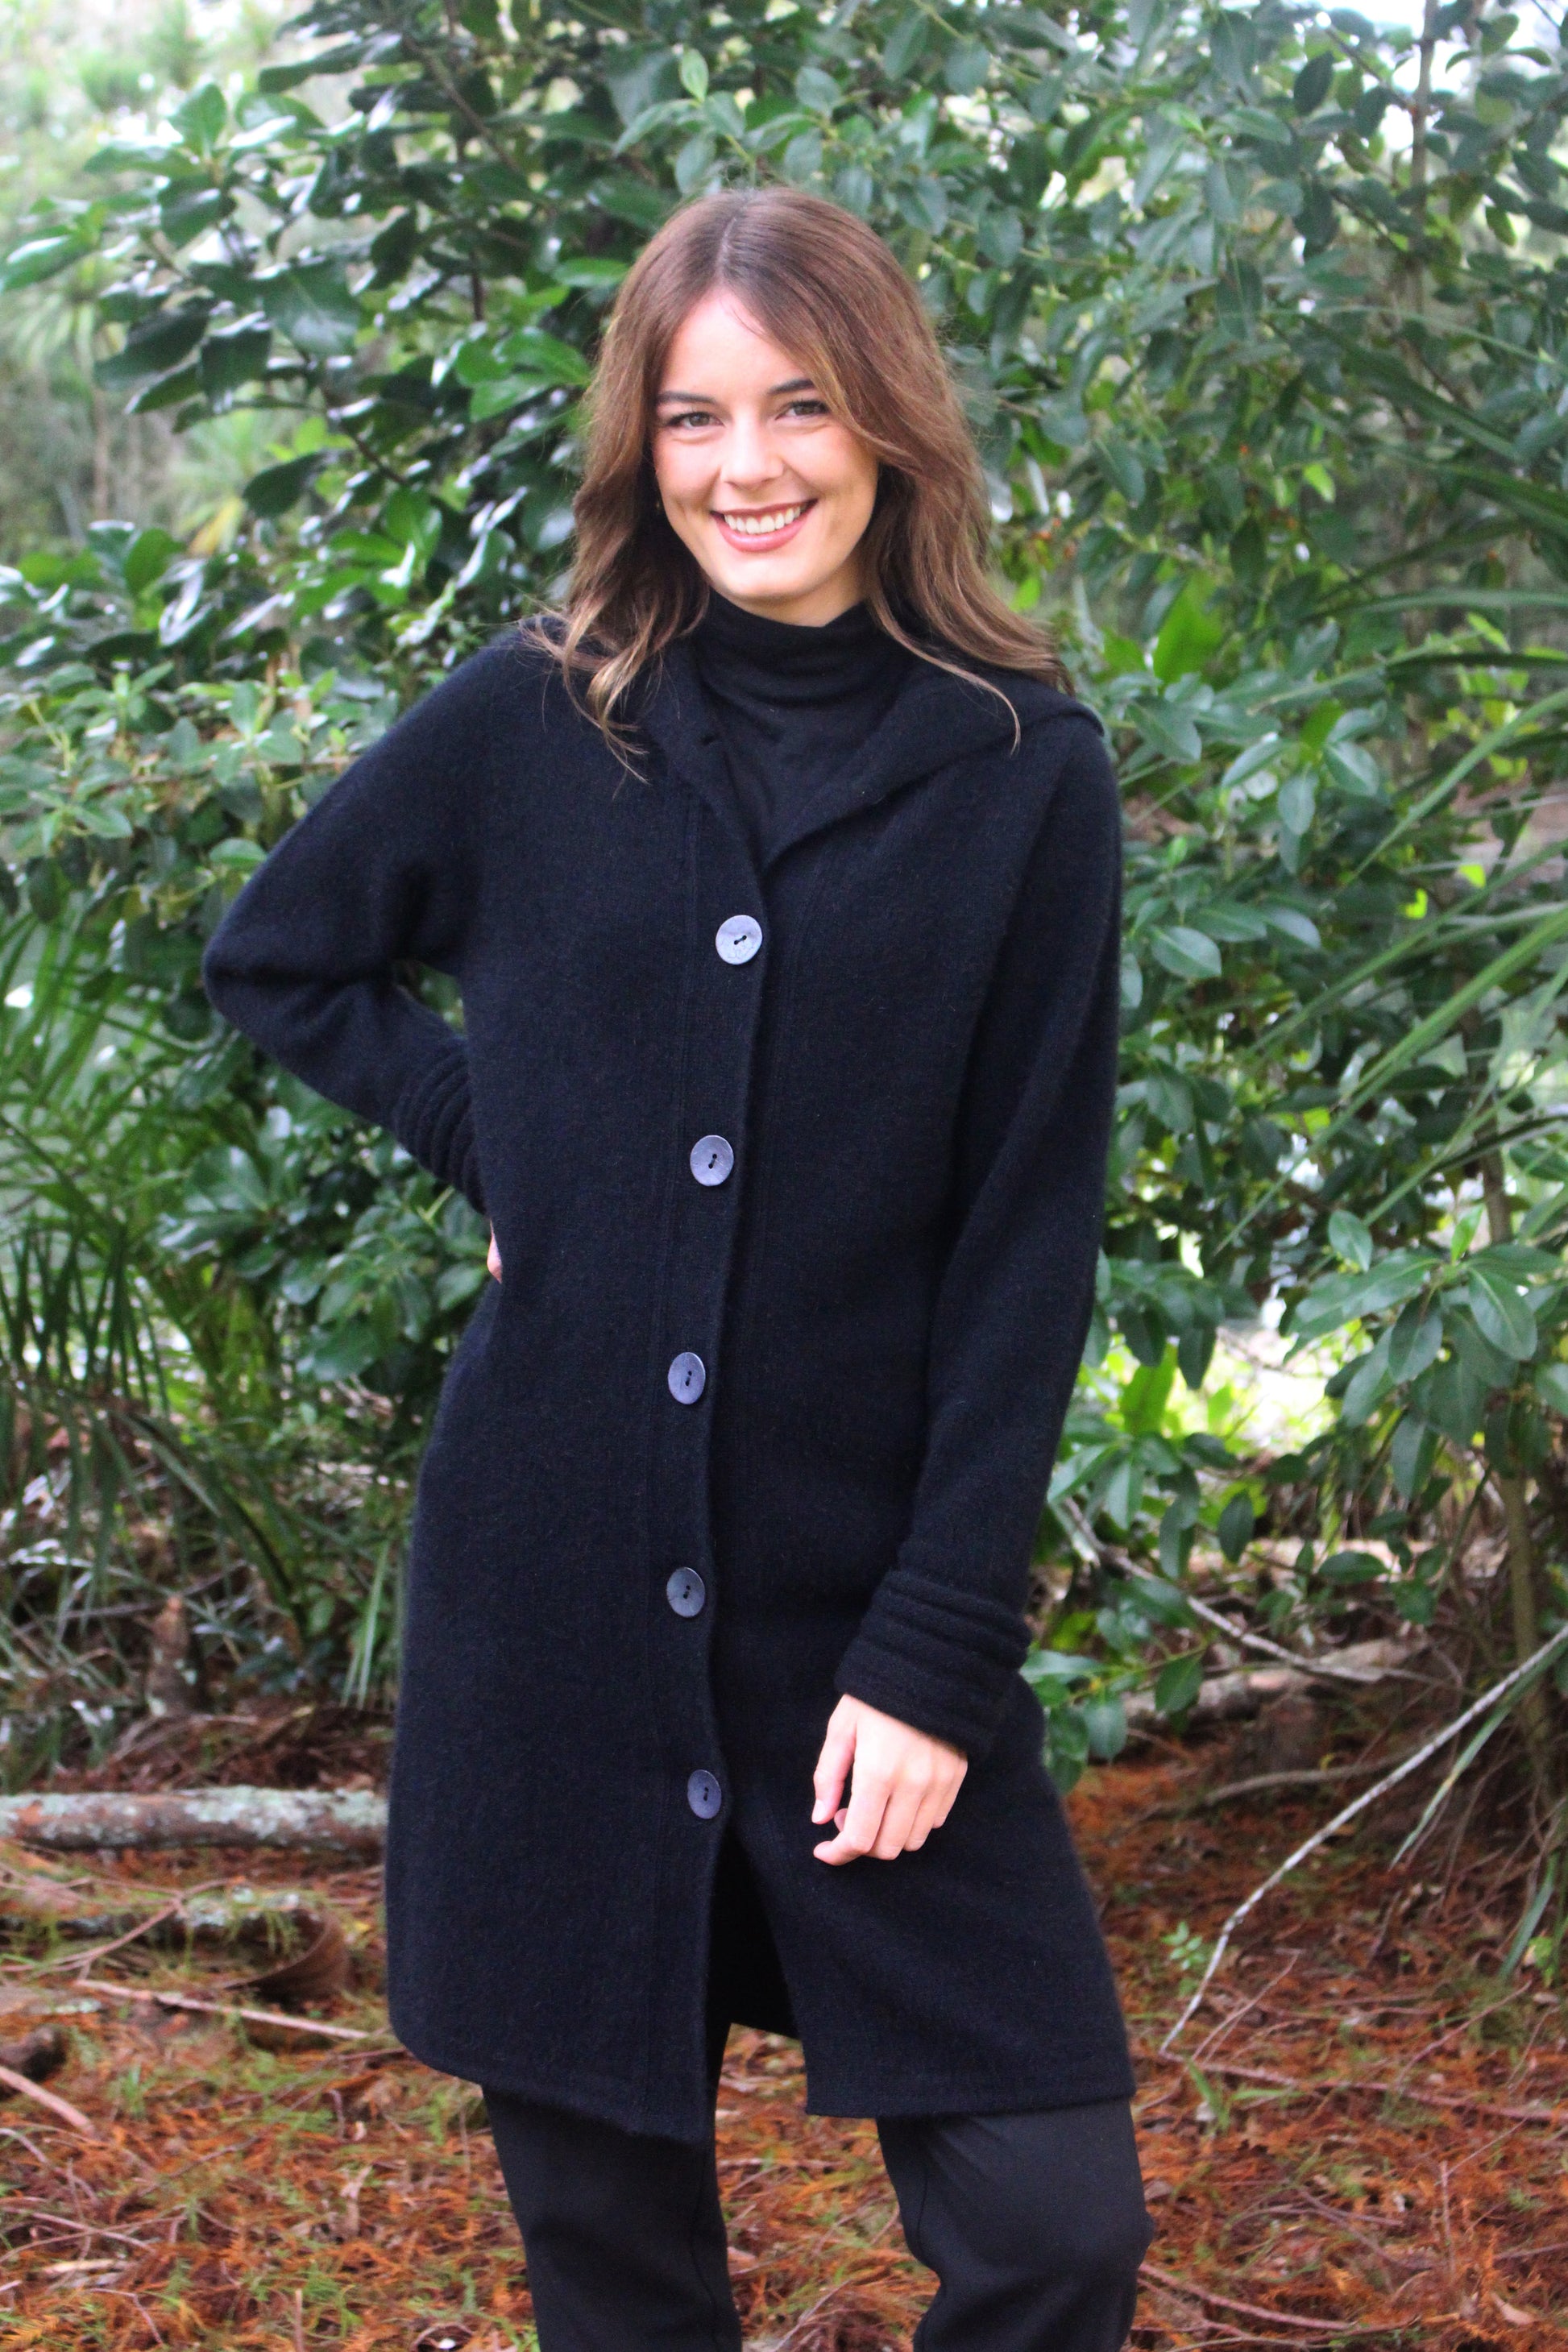 A heavier weight long coat in a possum merino blend. Has V-shaped rib detail at the collar and roll back cuffs with button through fastening. In black only and sizes S, M, L, XL, XXL. Made in NZ by Lothlorian for their Zinity Collection. 